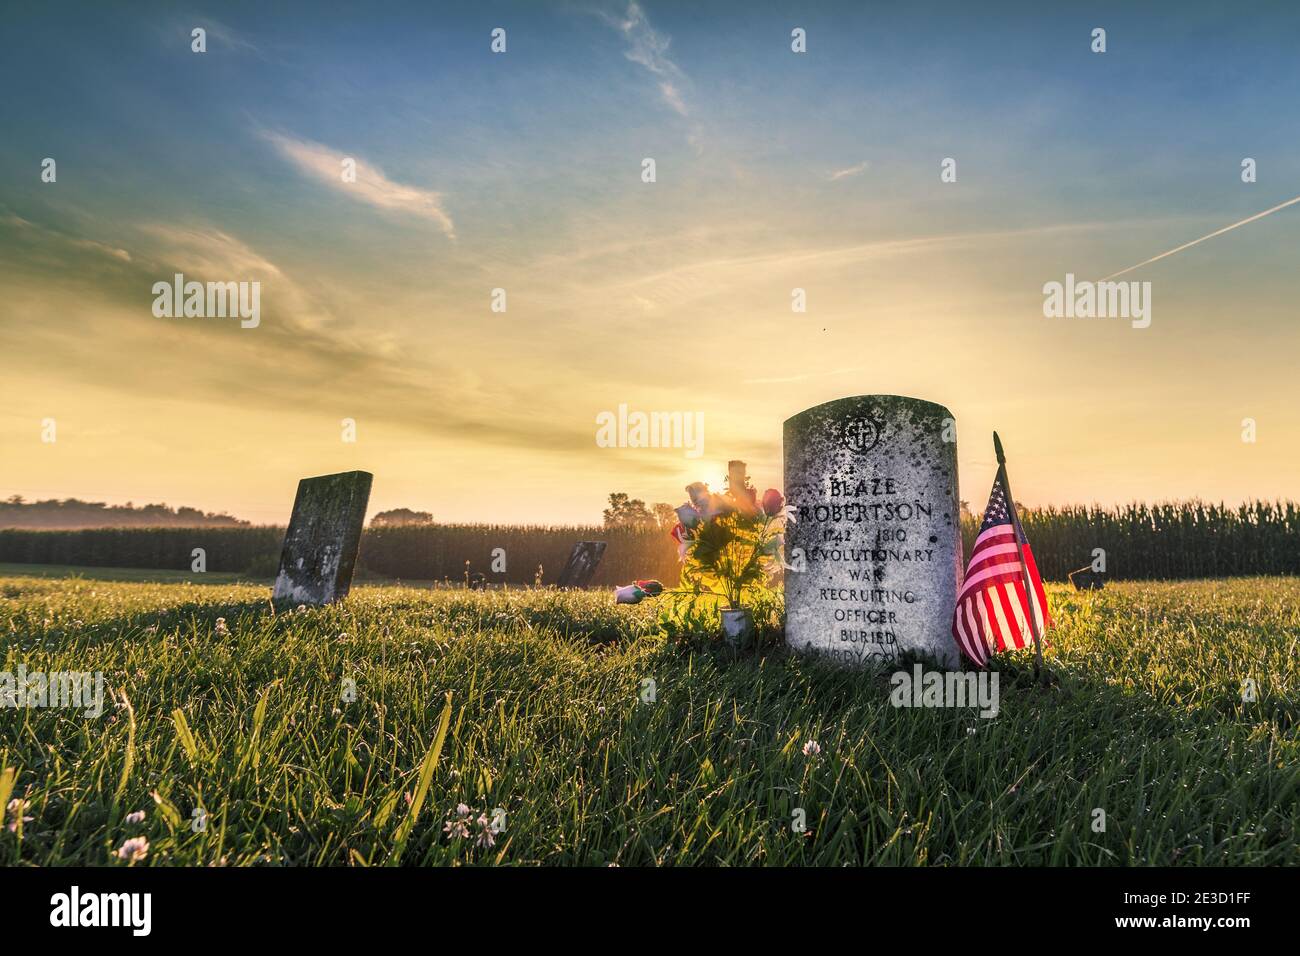 Sunrise over the headstone of a revolutionary war soldier on the Fourth of July.  The headstone is flanked by an American Flag and flowers. Stock Photo